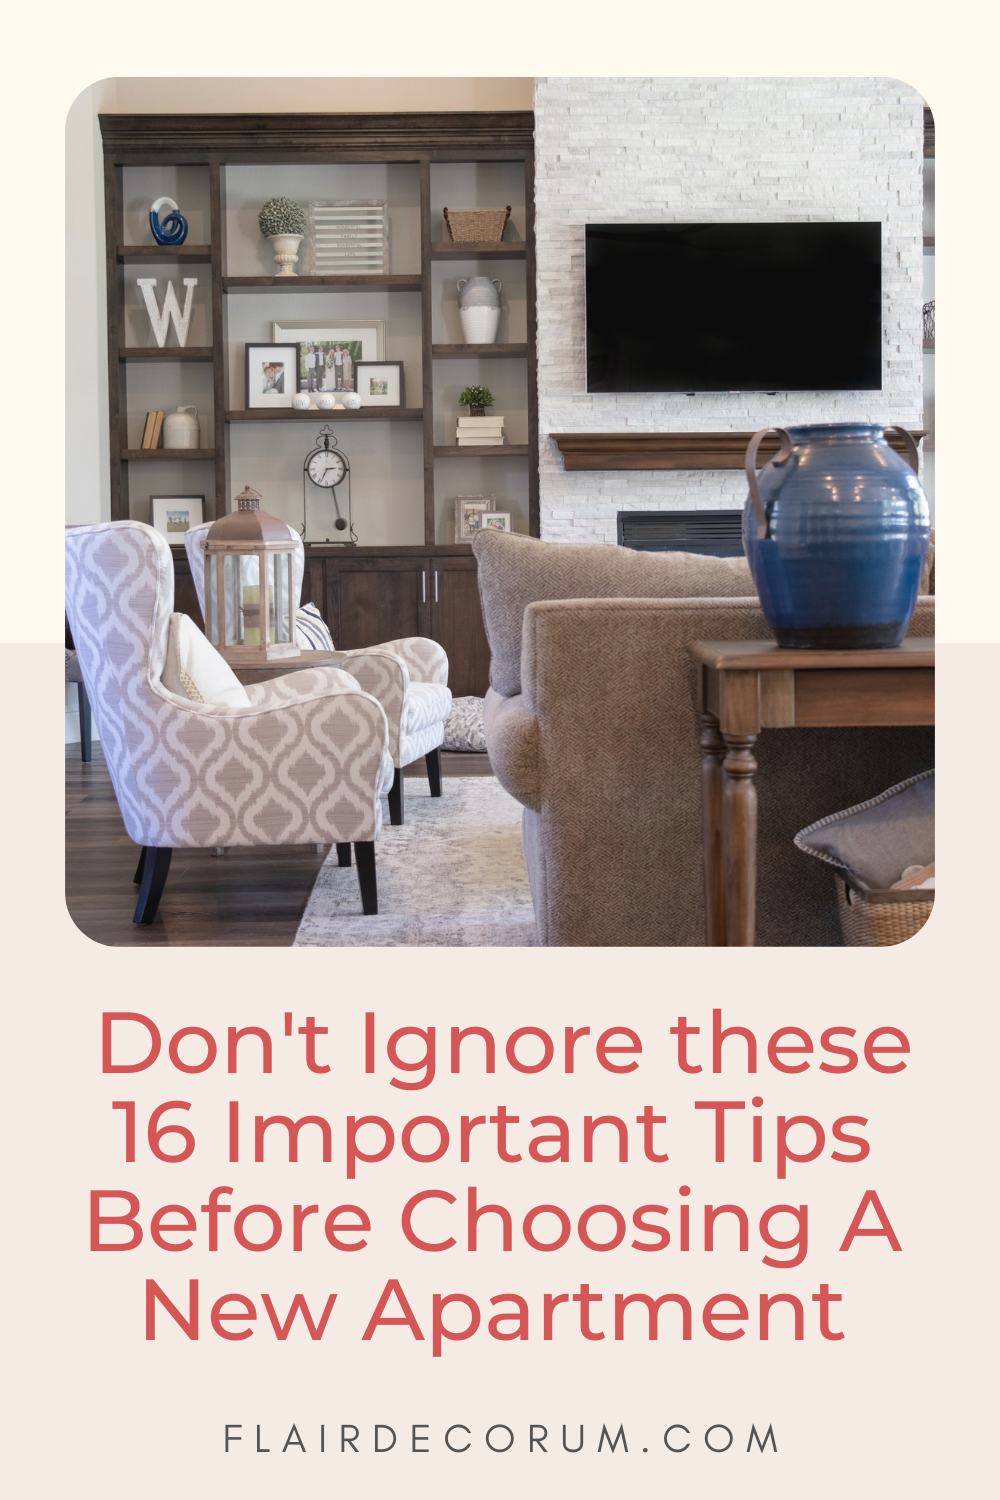 Pinterest pin about important tips in choosing a new apartment